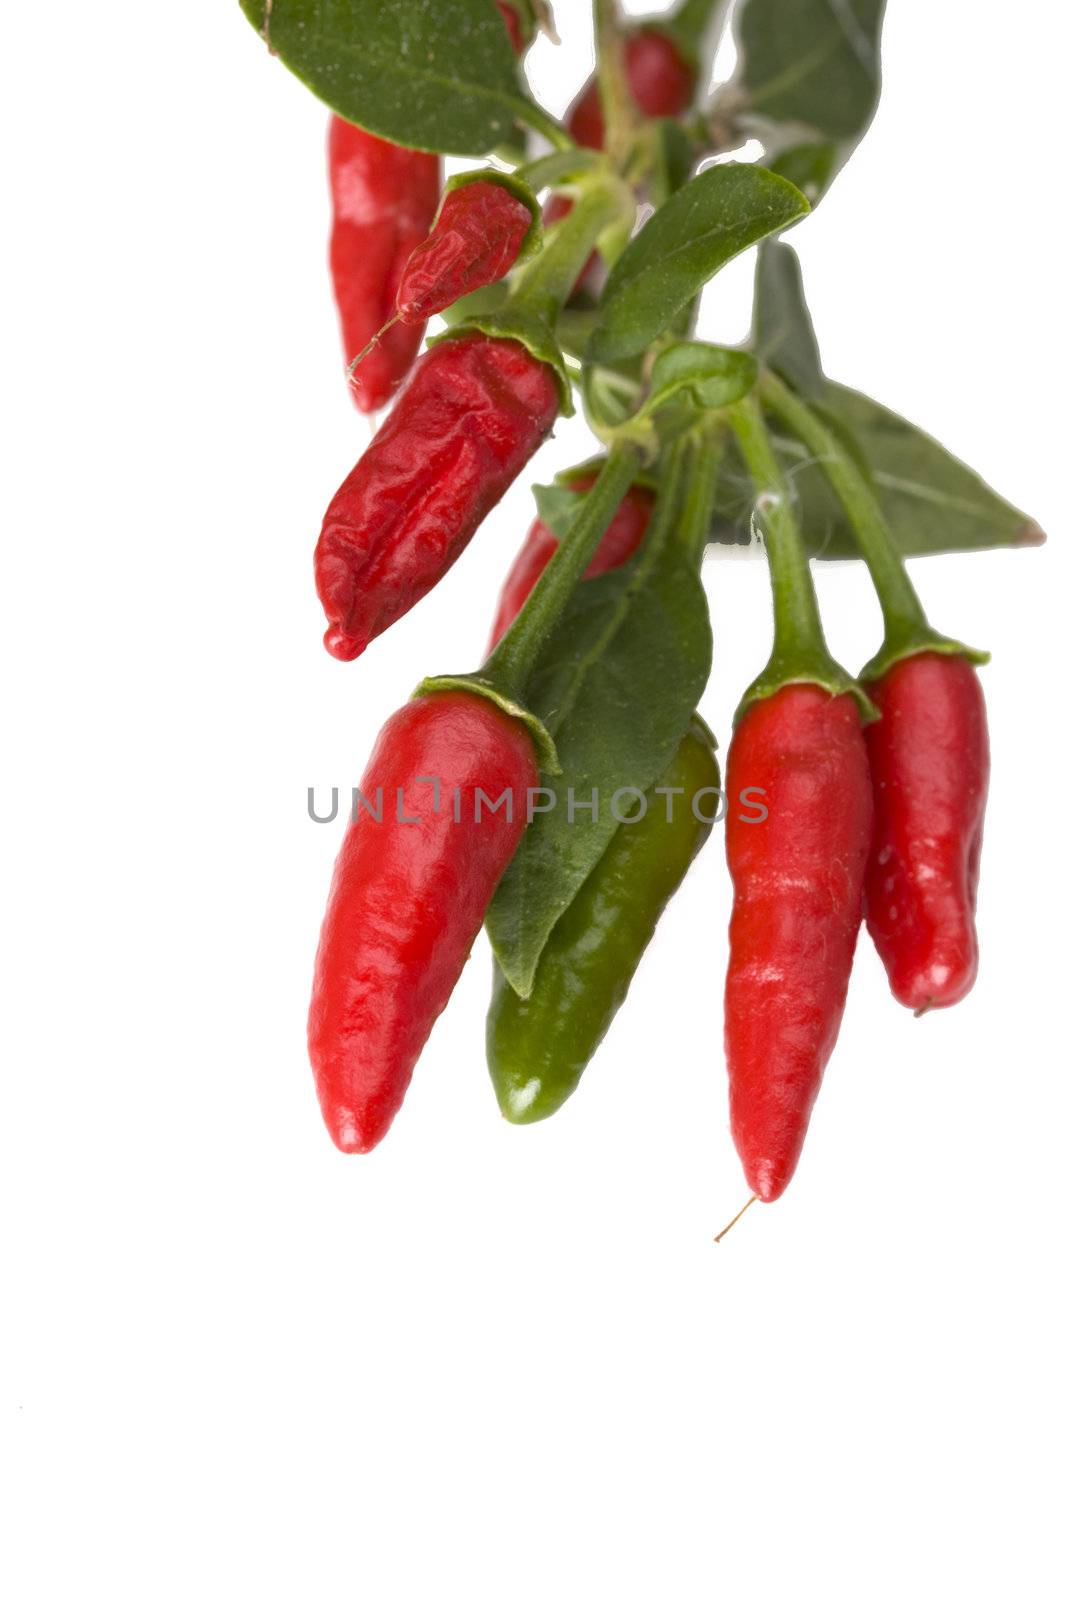 red hot chili peppers on a tree by bernjuer